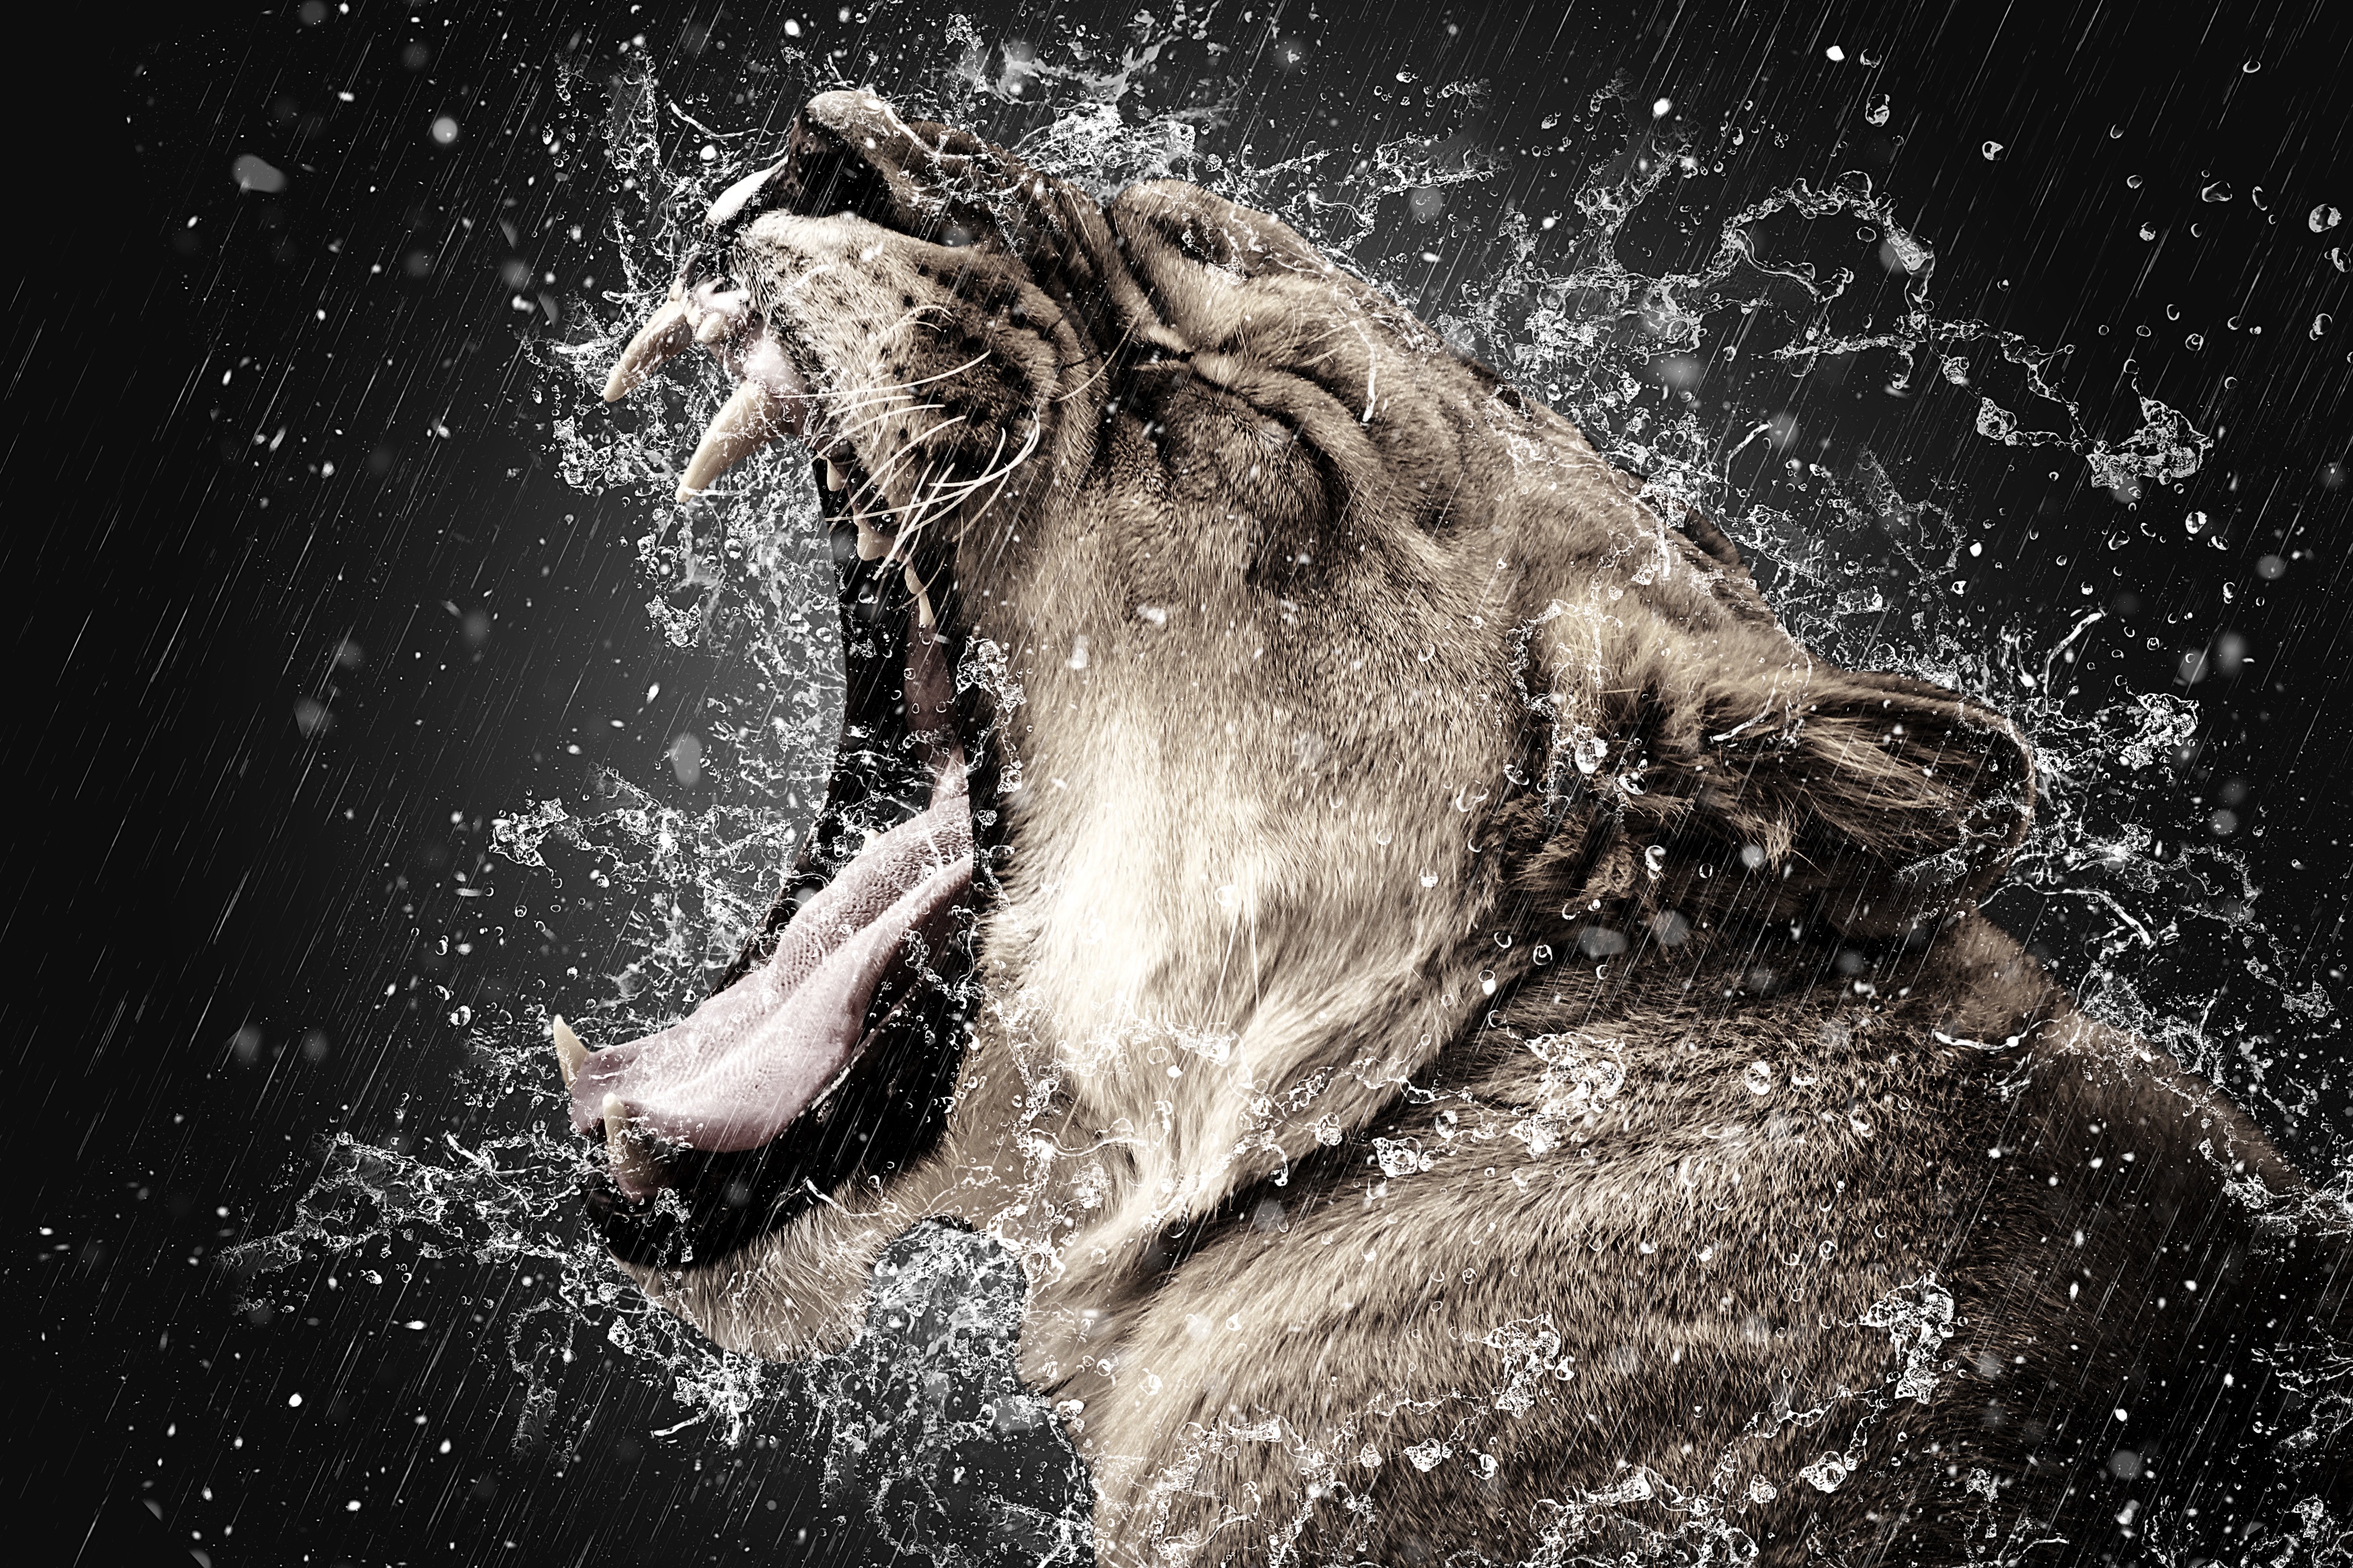 83765 download wallpaper animals, grin, spray, lion, predator, fangs screensavers and pictures for free